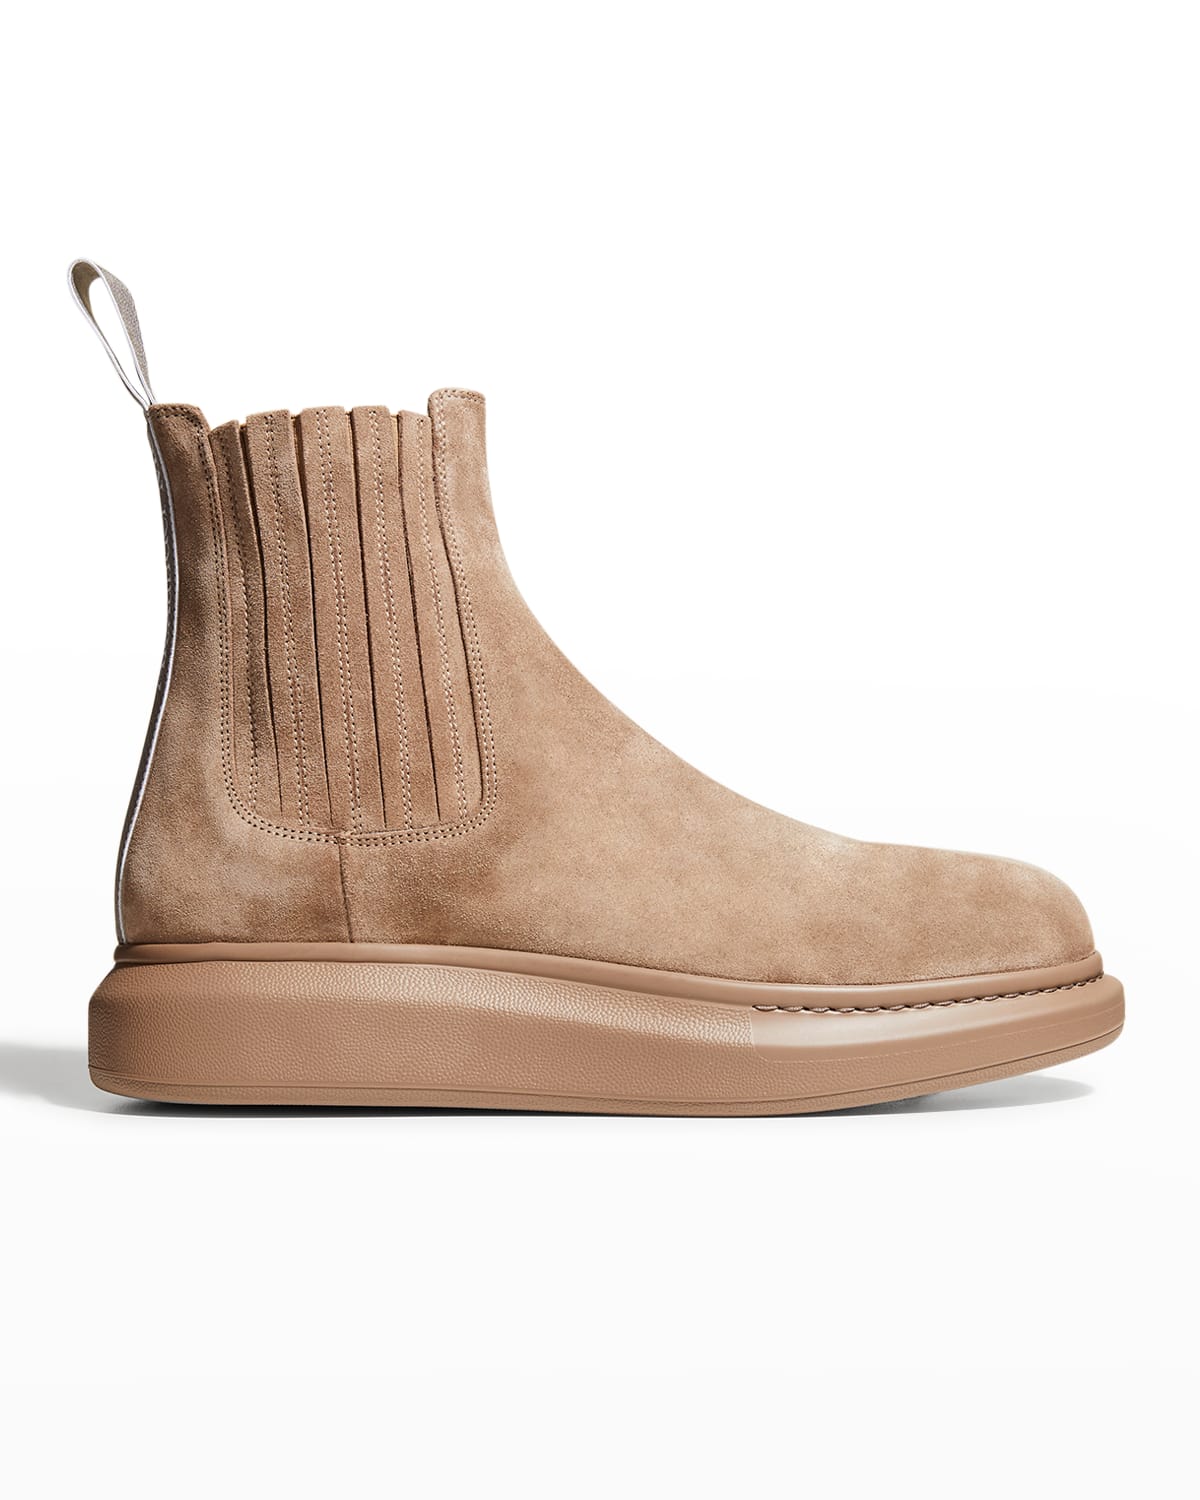 Men's Suede Leather Chelsea Boots